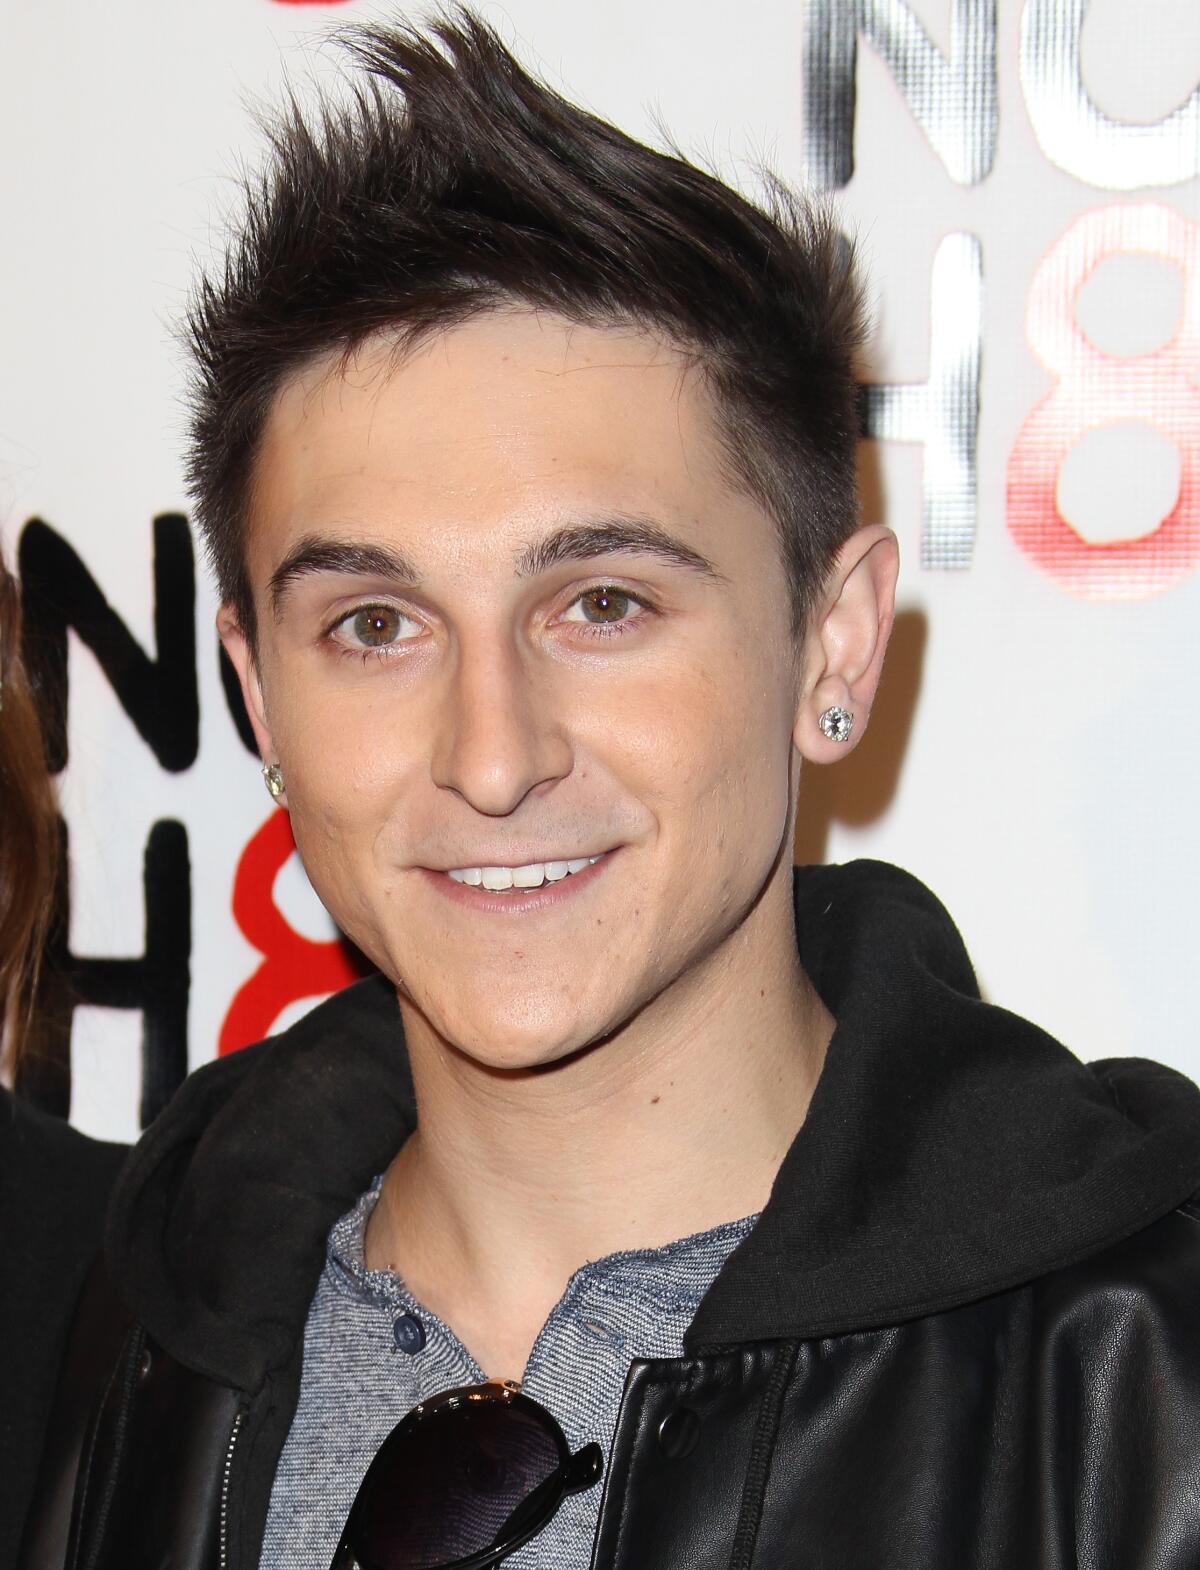 Mitchel Musso wears a black leather jacket and a gray shirt as he  stands in front of a backdrop